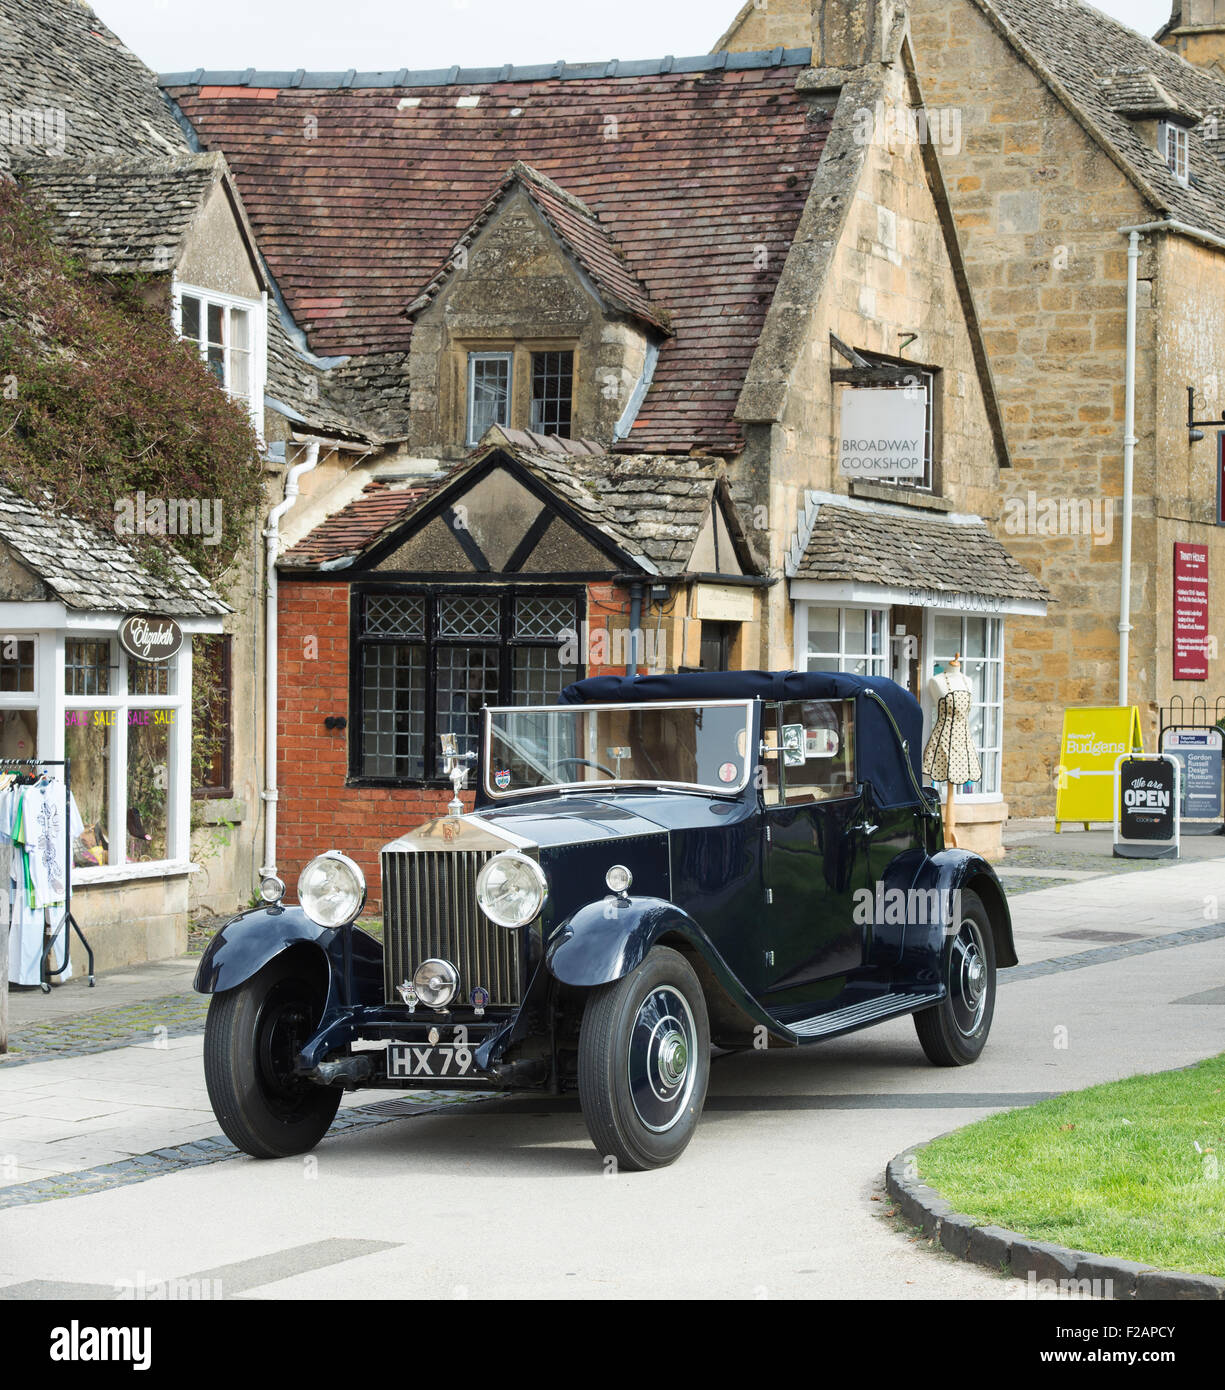 Oldtimer Rolls Royce 20/25 in Broadway, Cotswolds, Worcestershire, England Stockfoto